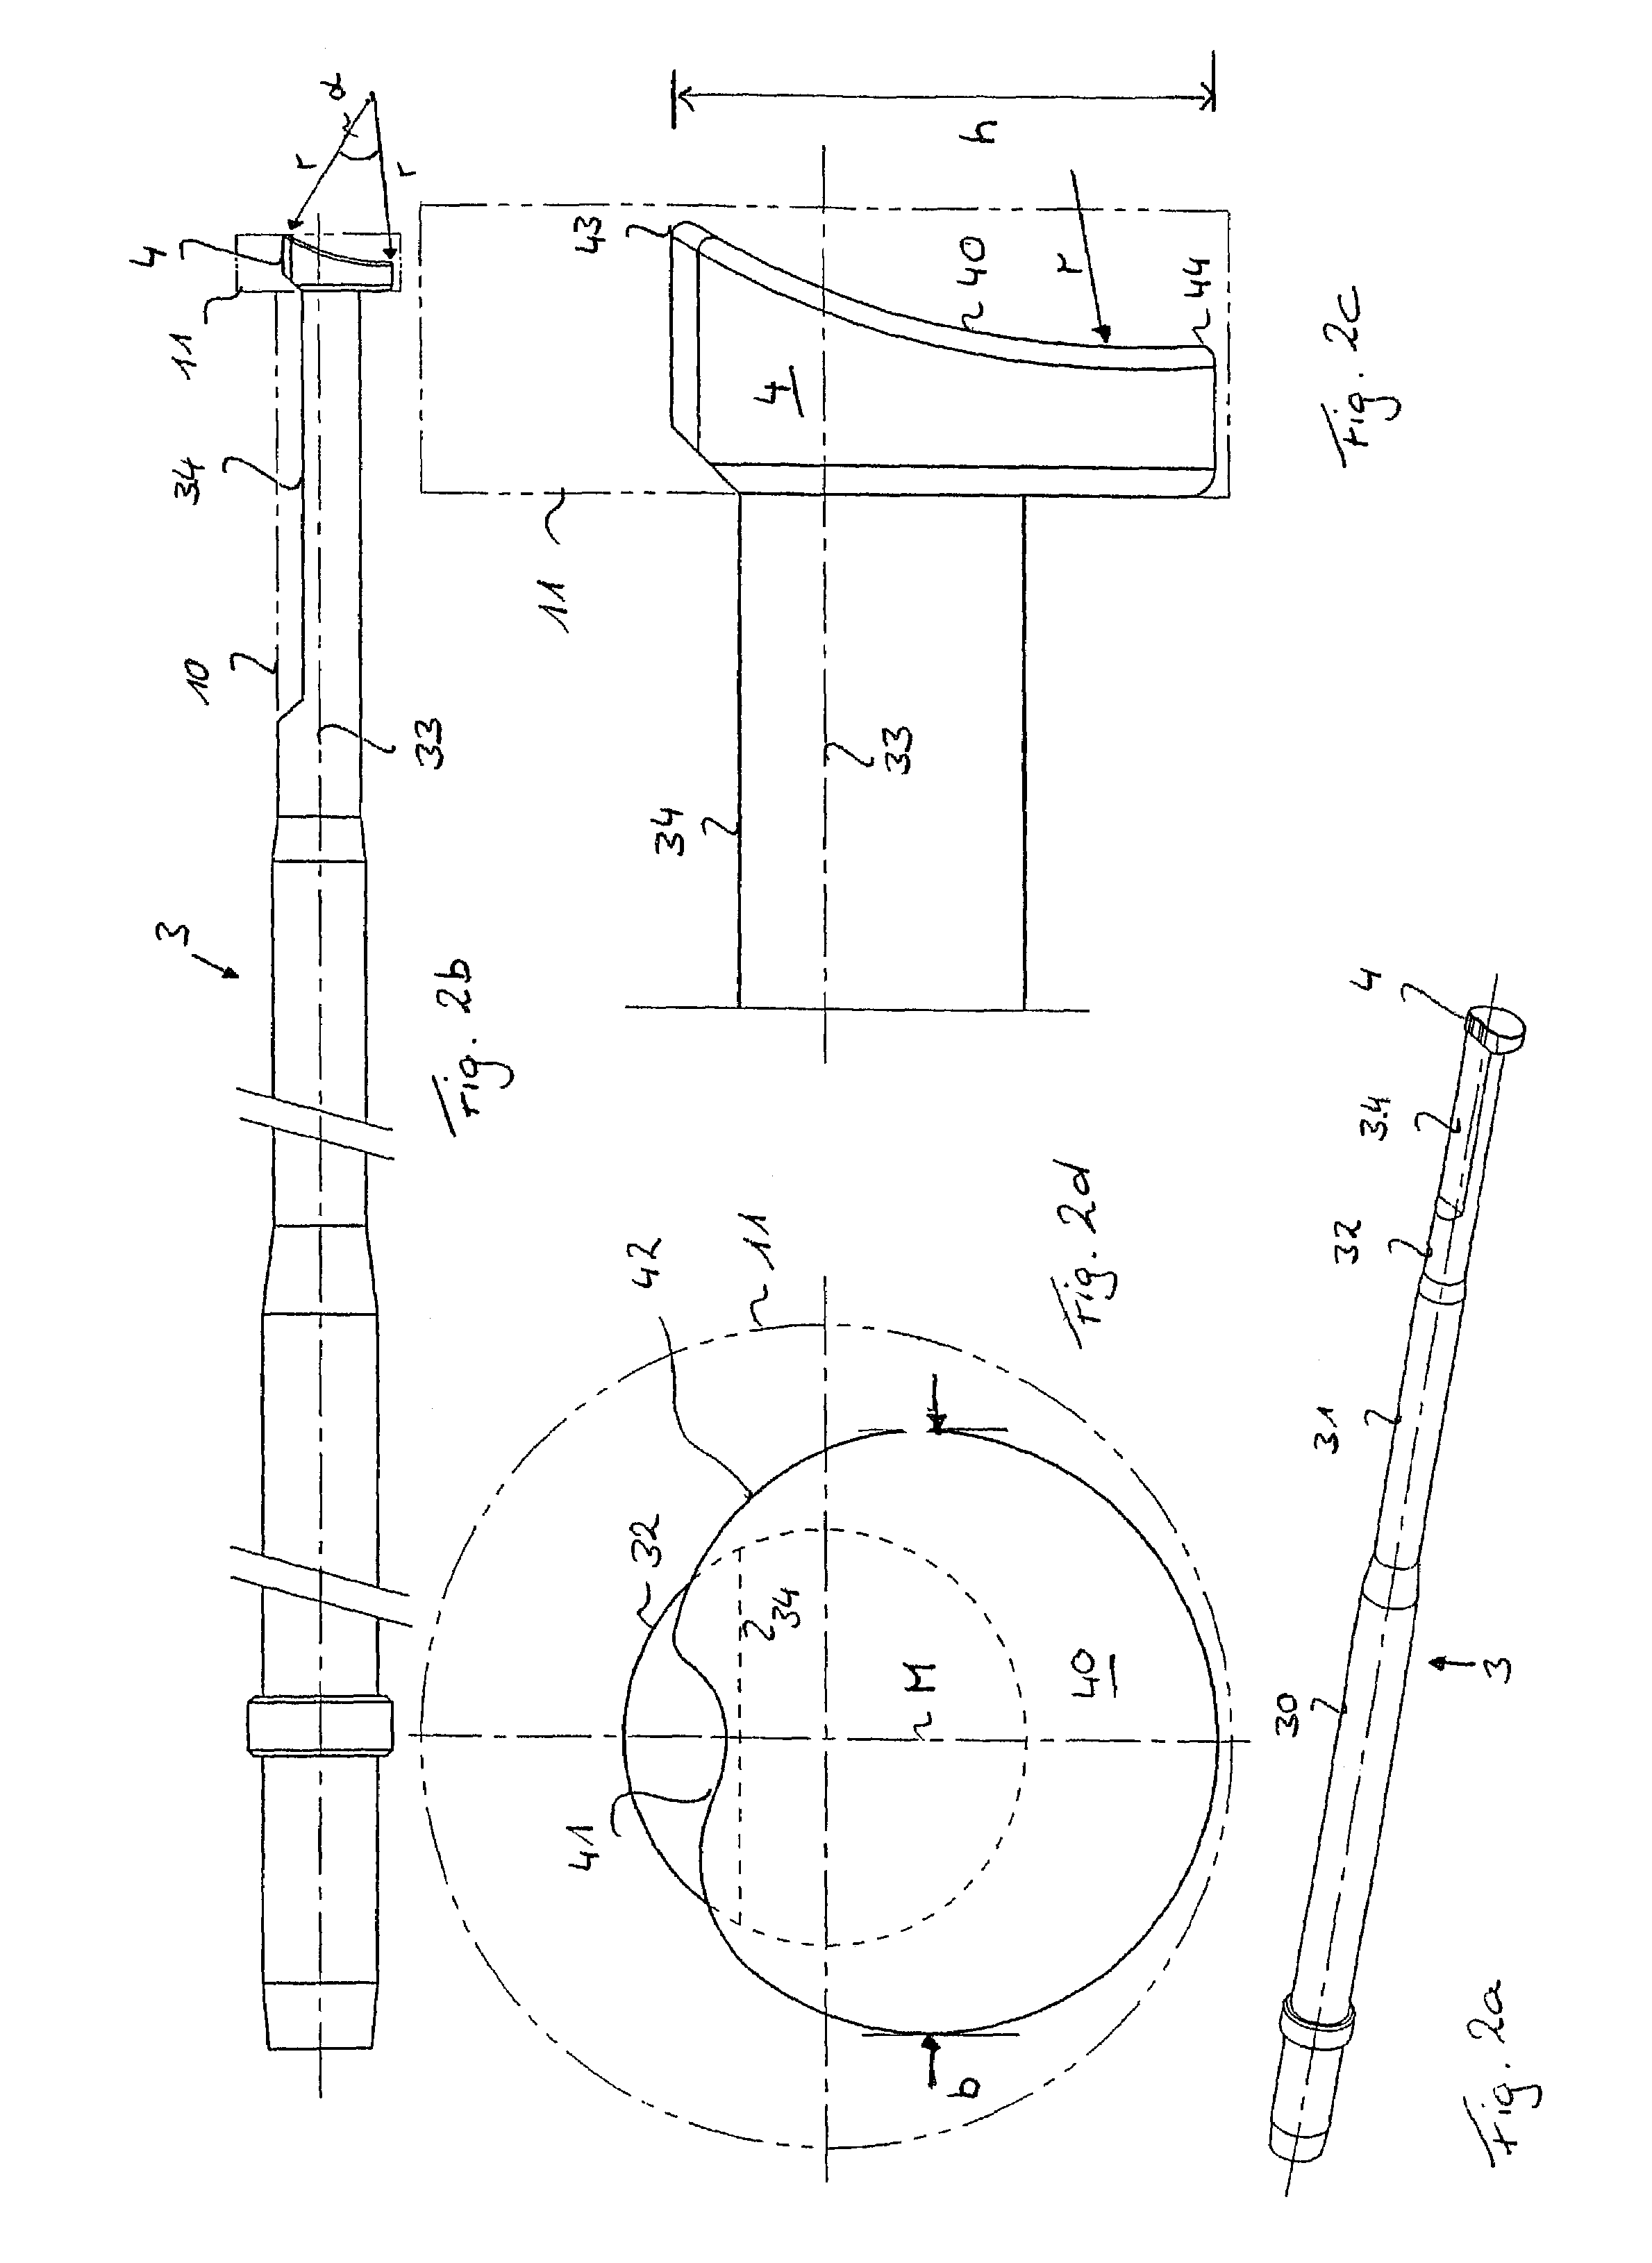 Plunger needle for an intraocular lens injector